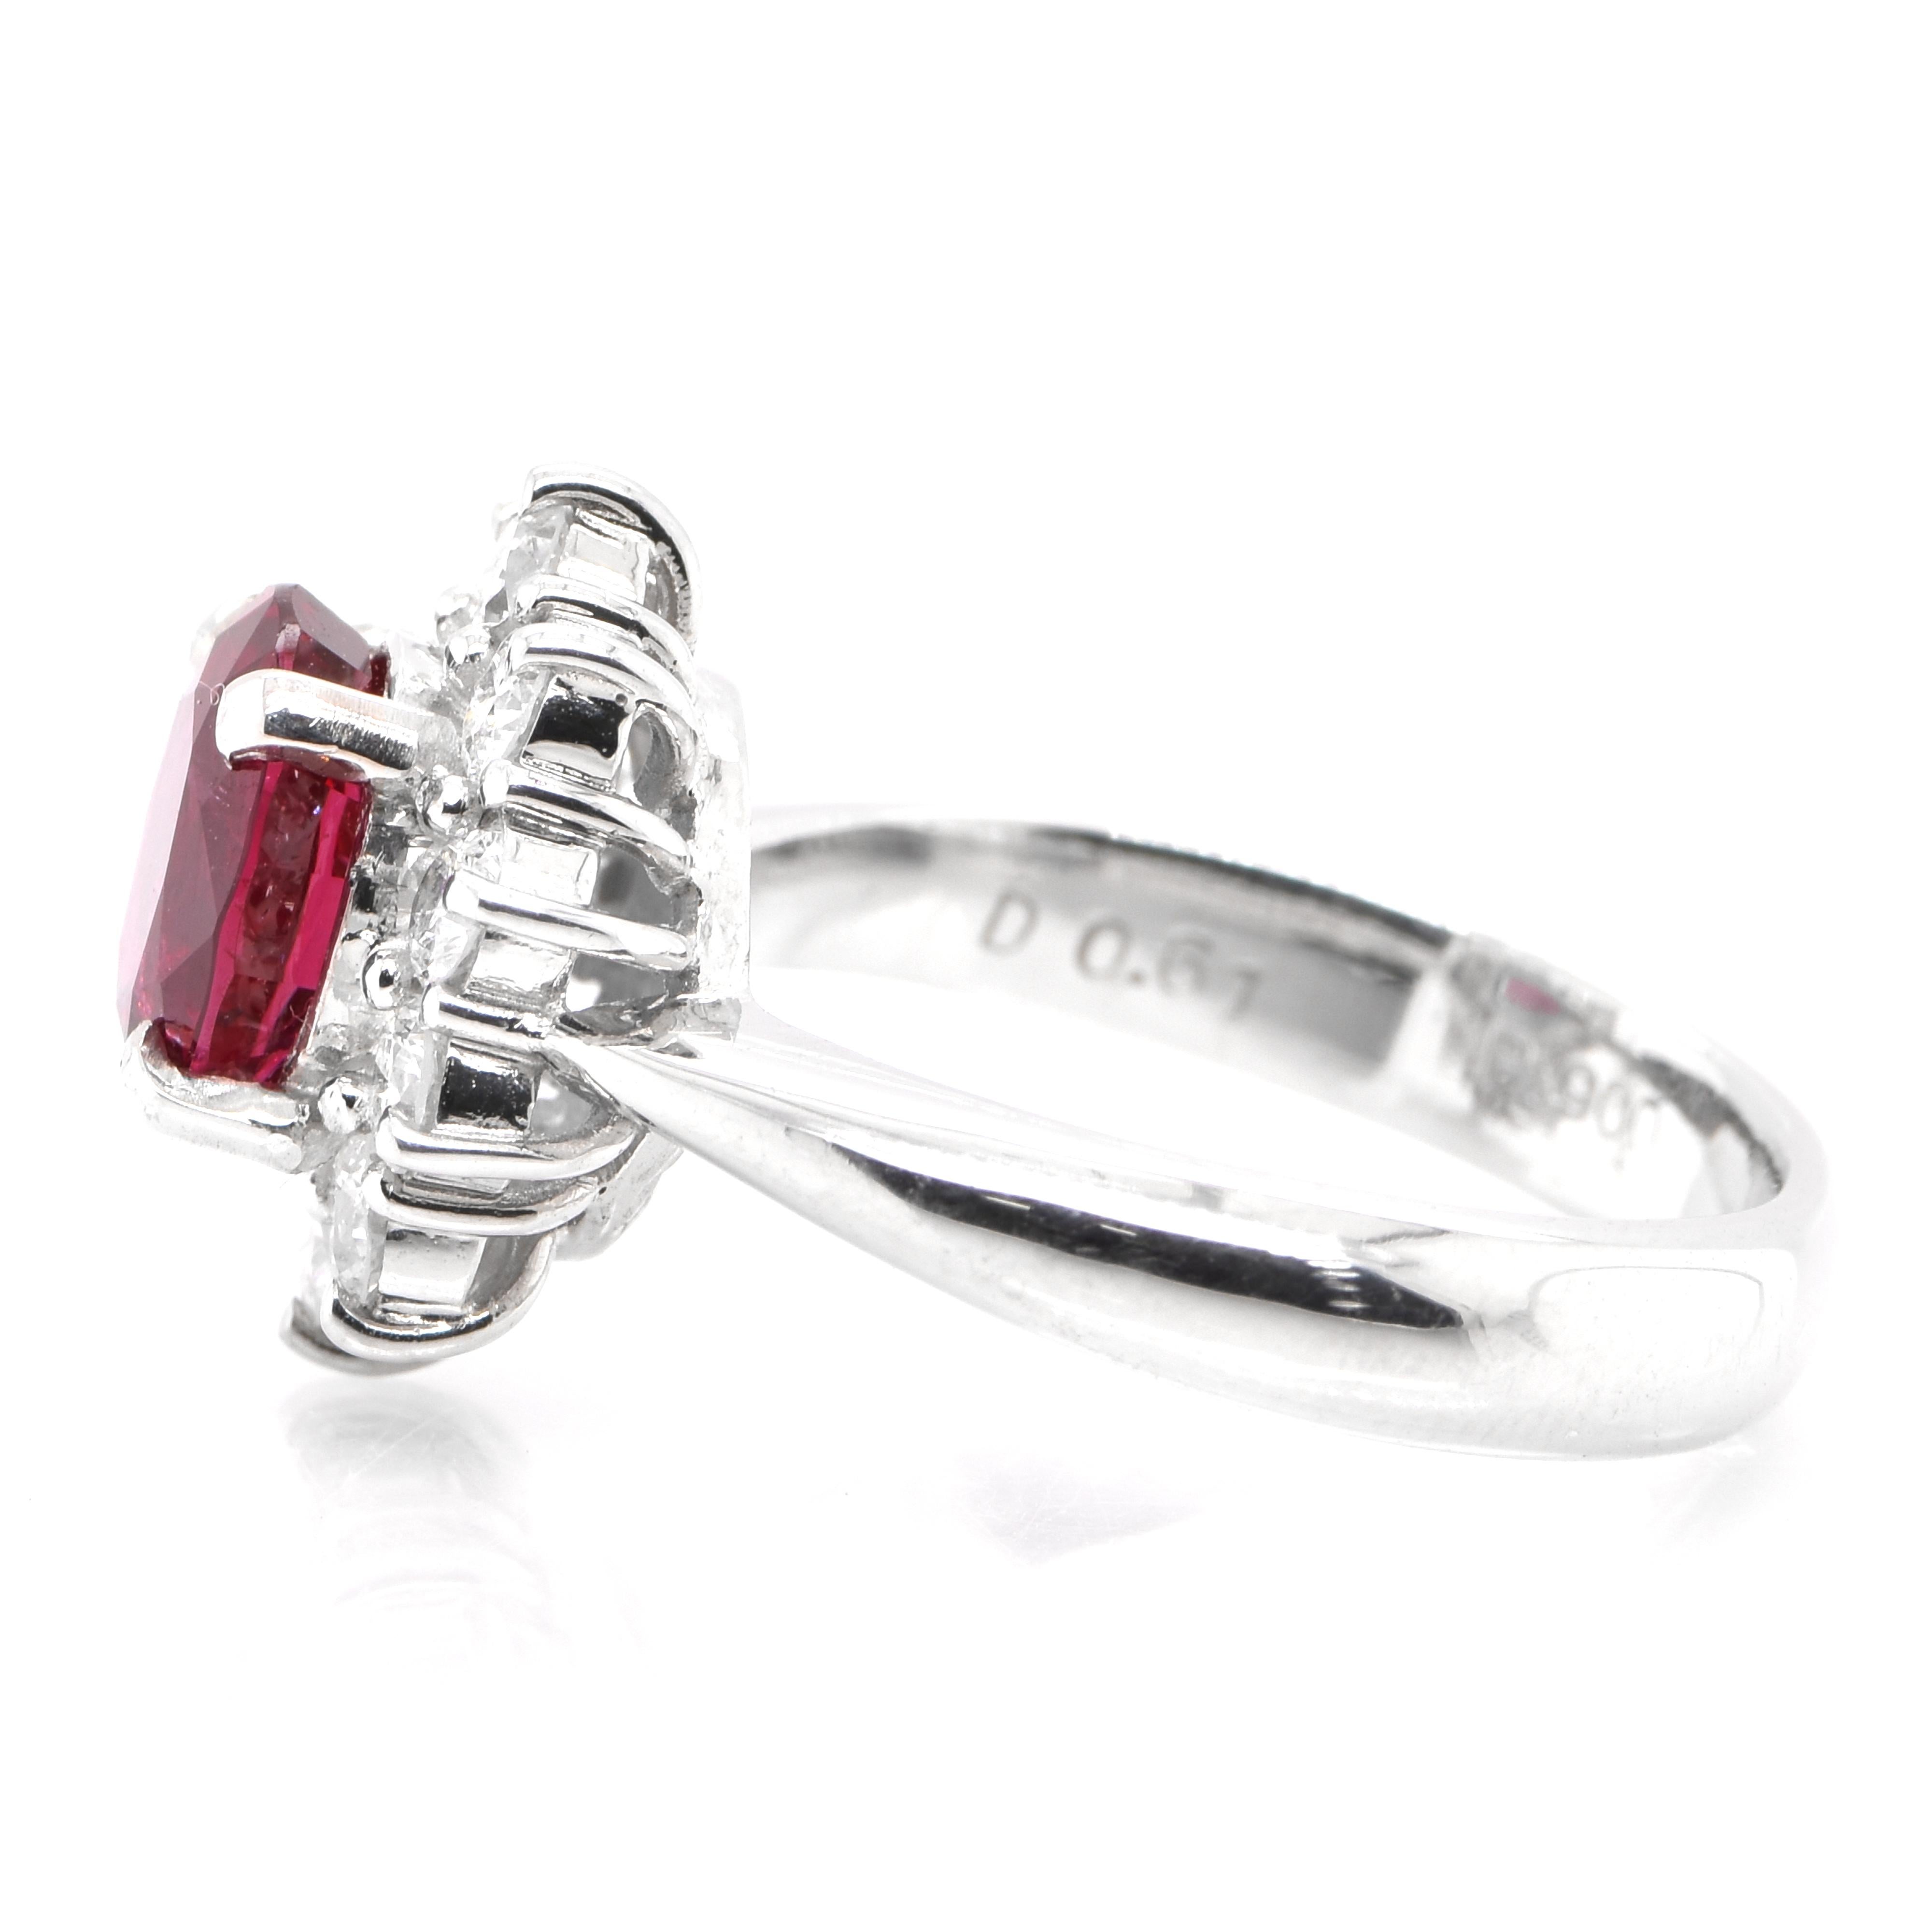 Oval Cut 1.83 Carat Natural Red Spinel and Diamond Halo Ring Set in Platinum